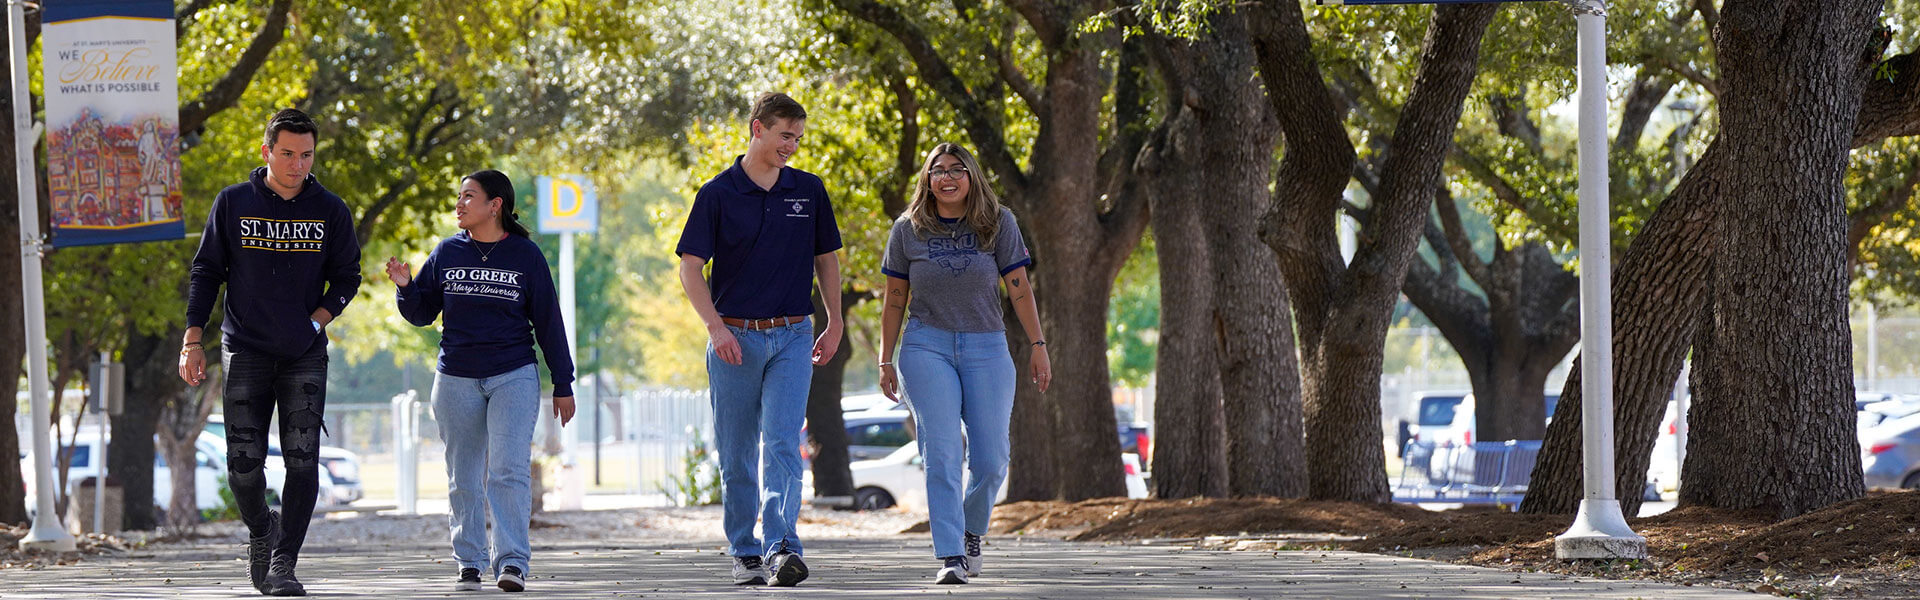 Four students in St. Mary's apparel chat while walking on a tree-lined pathway on campus